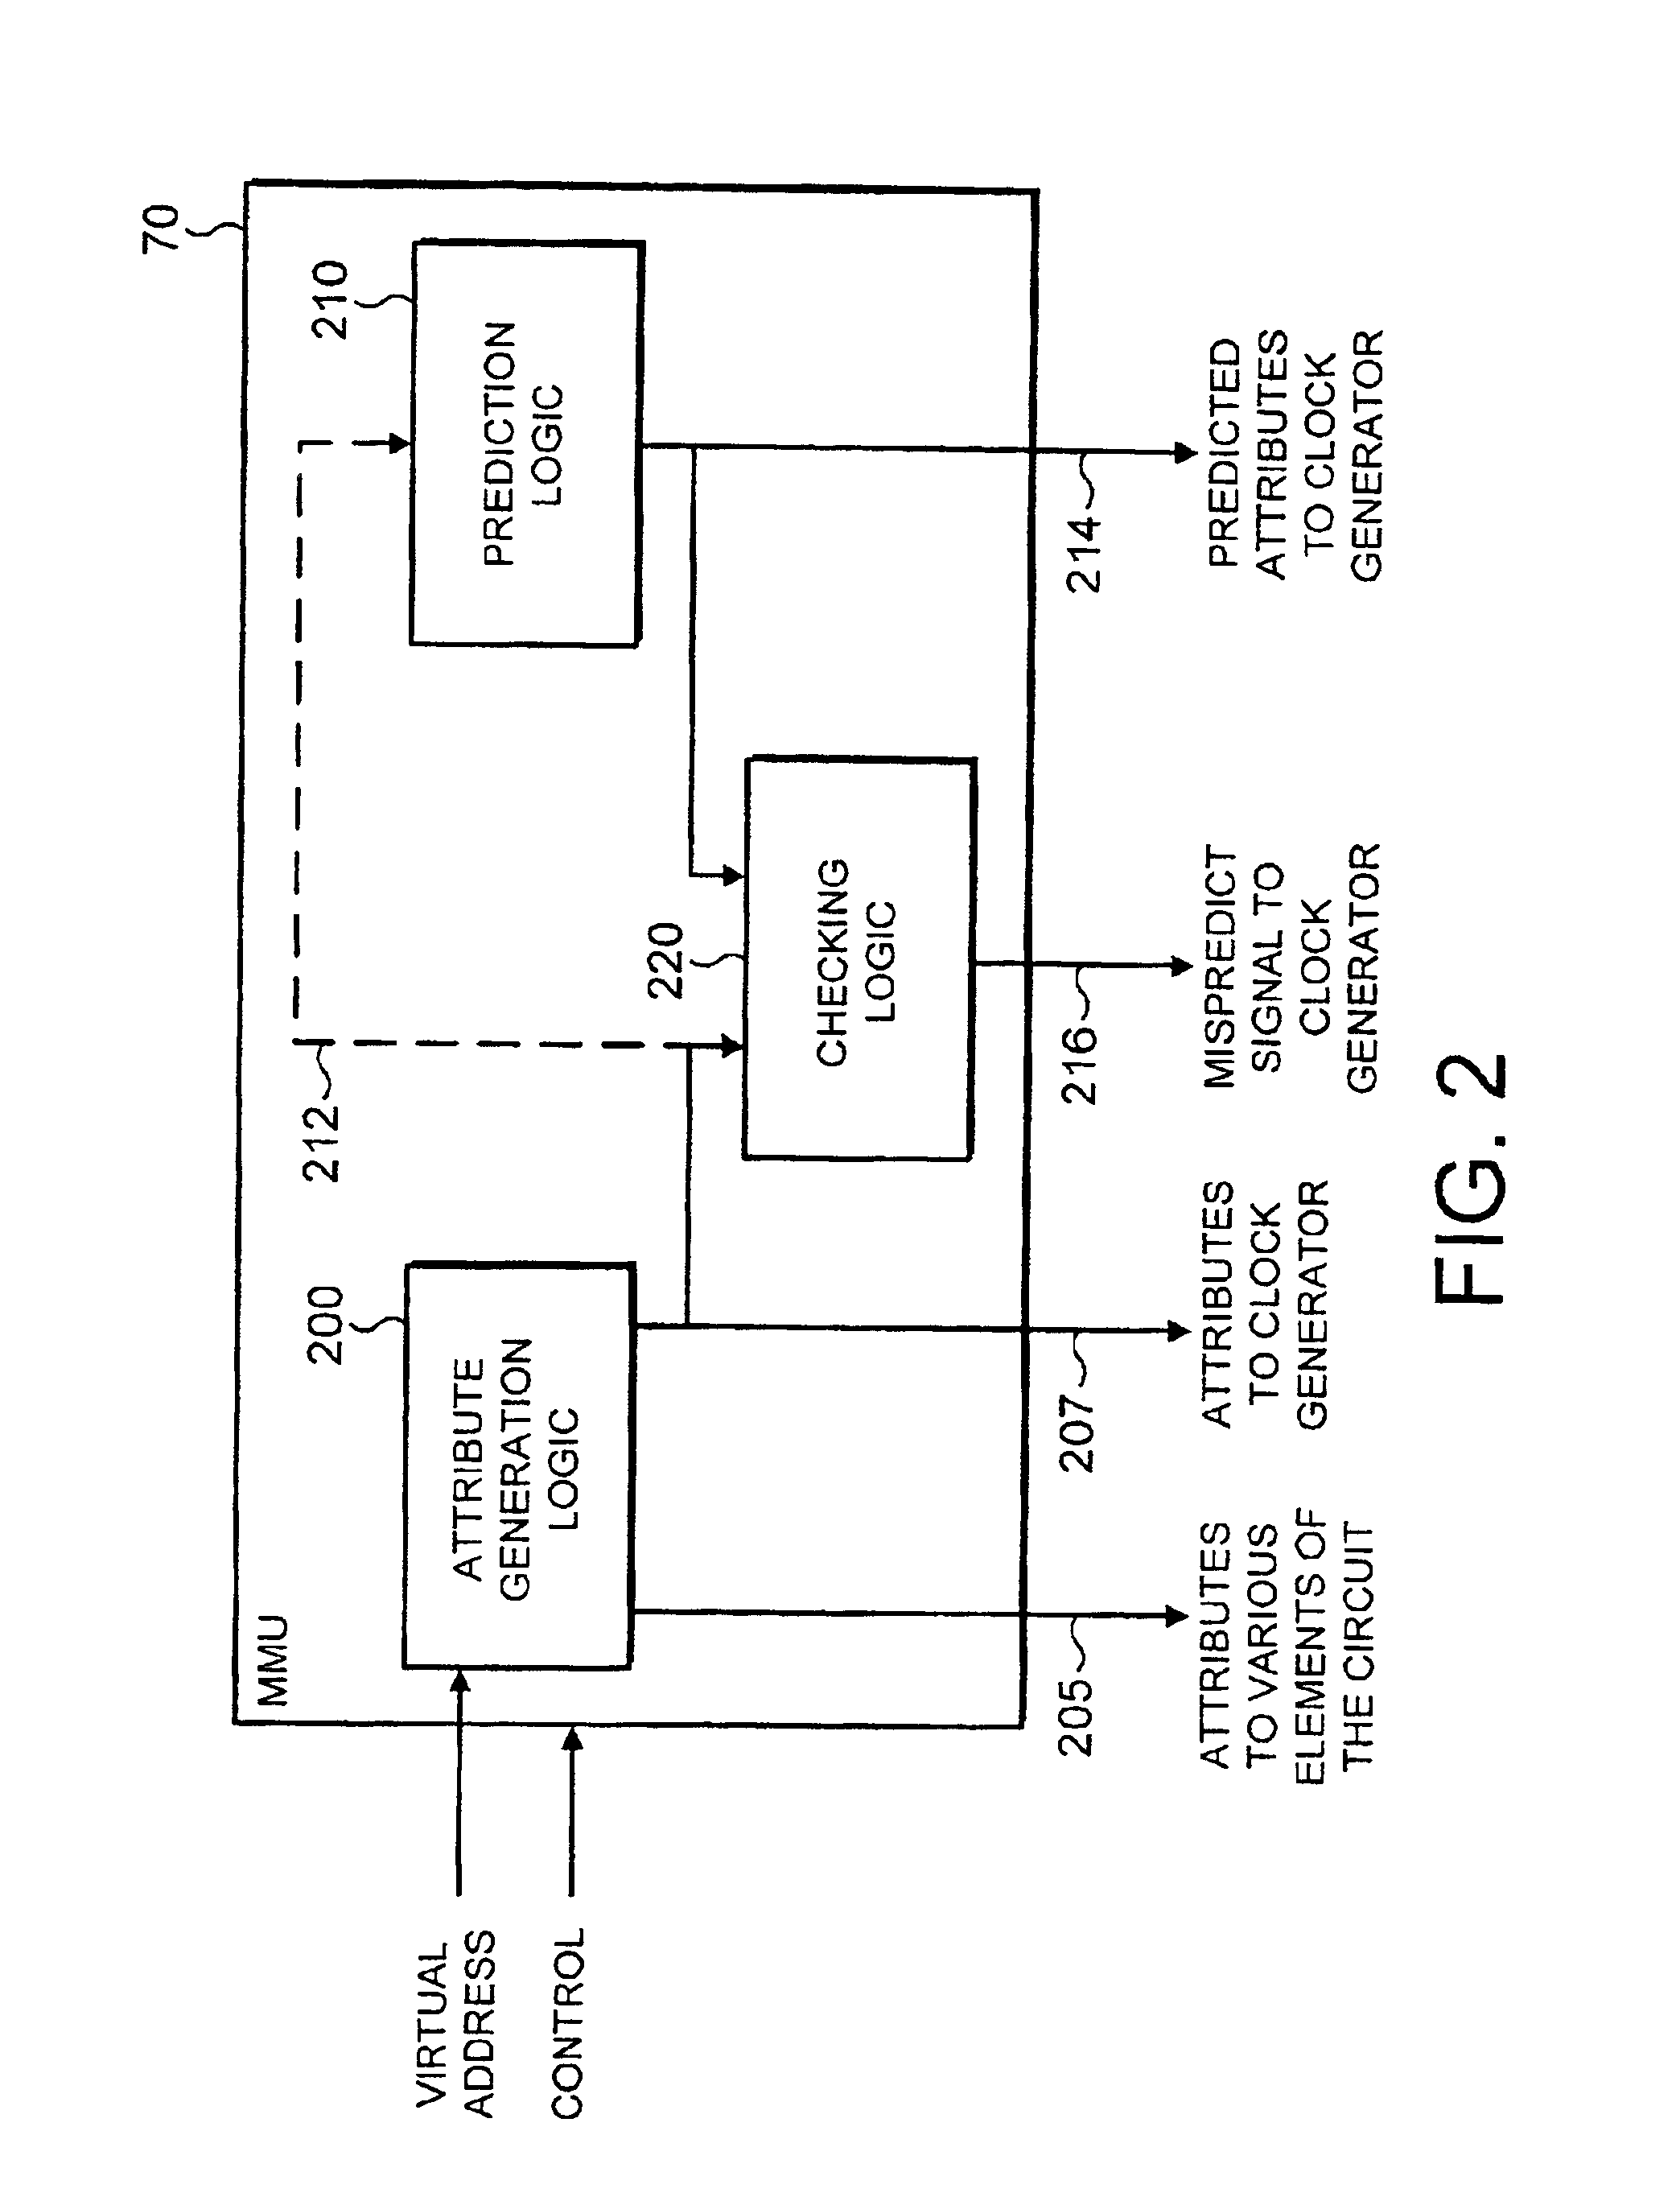 Accessing memory units in a data processing apparatus